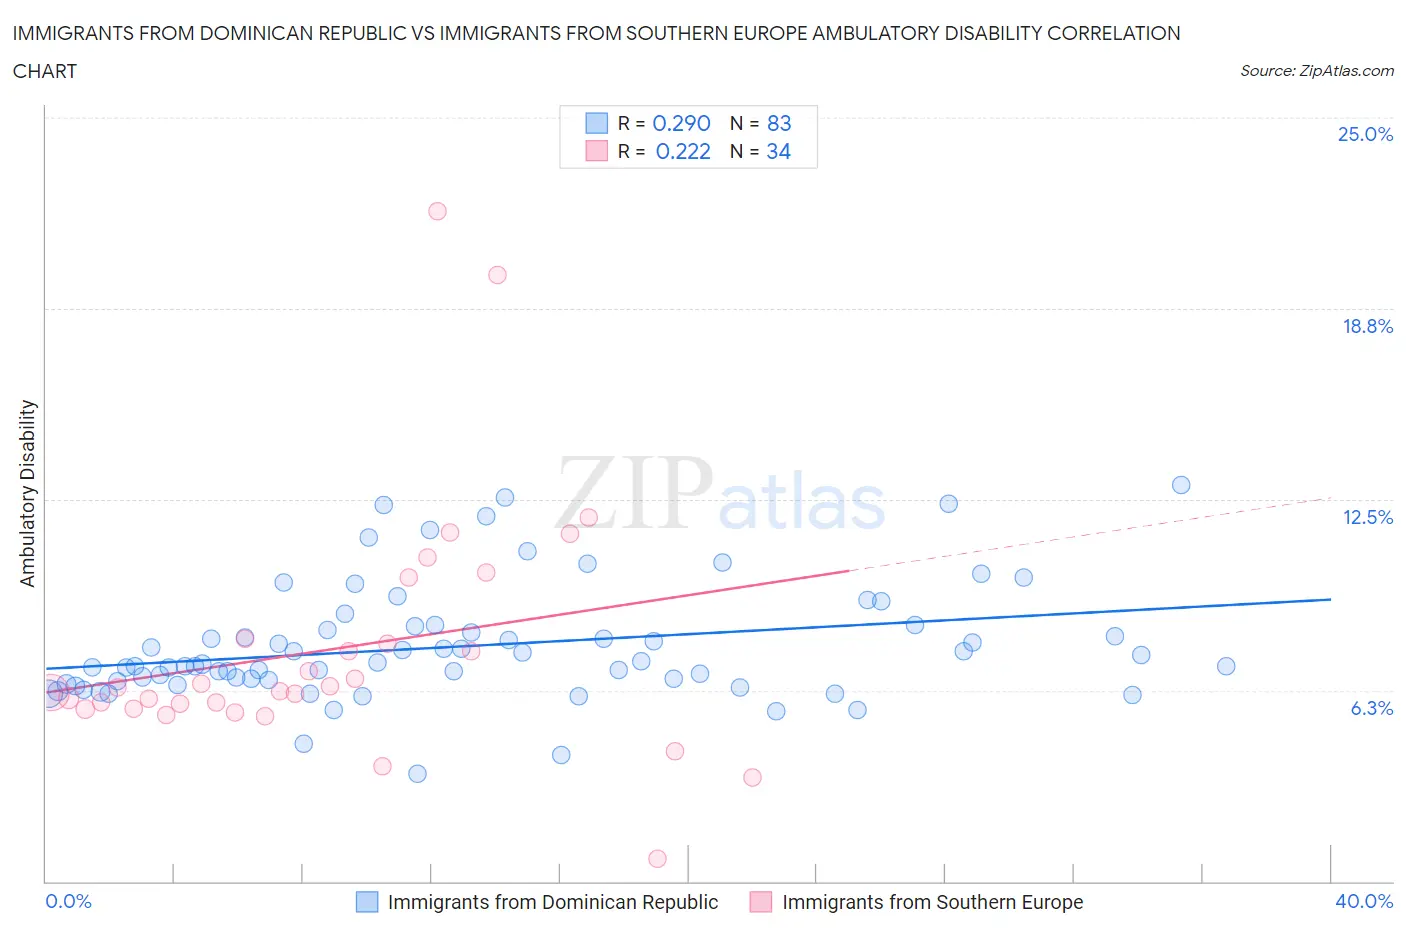 Immigrants from Dominican Republic vs Immigrants from Southern Europe Ambulatory Disability